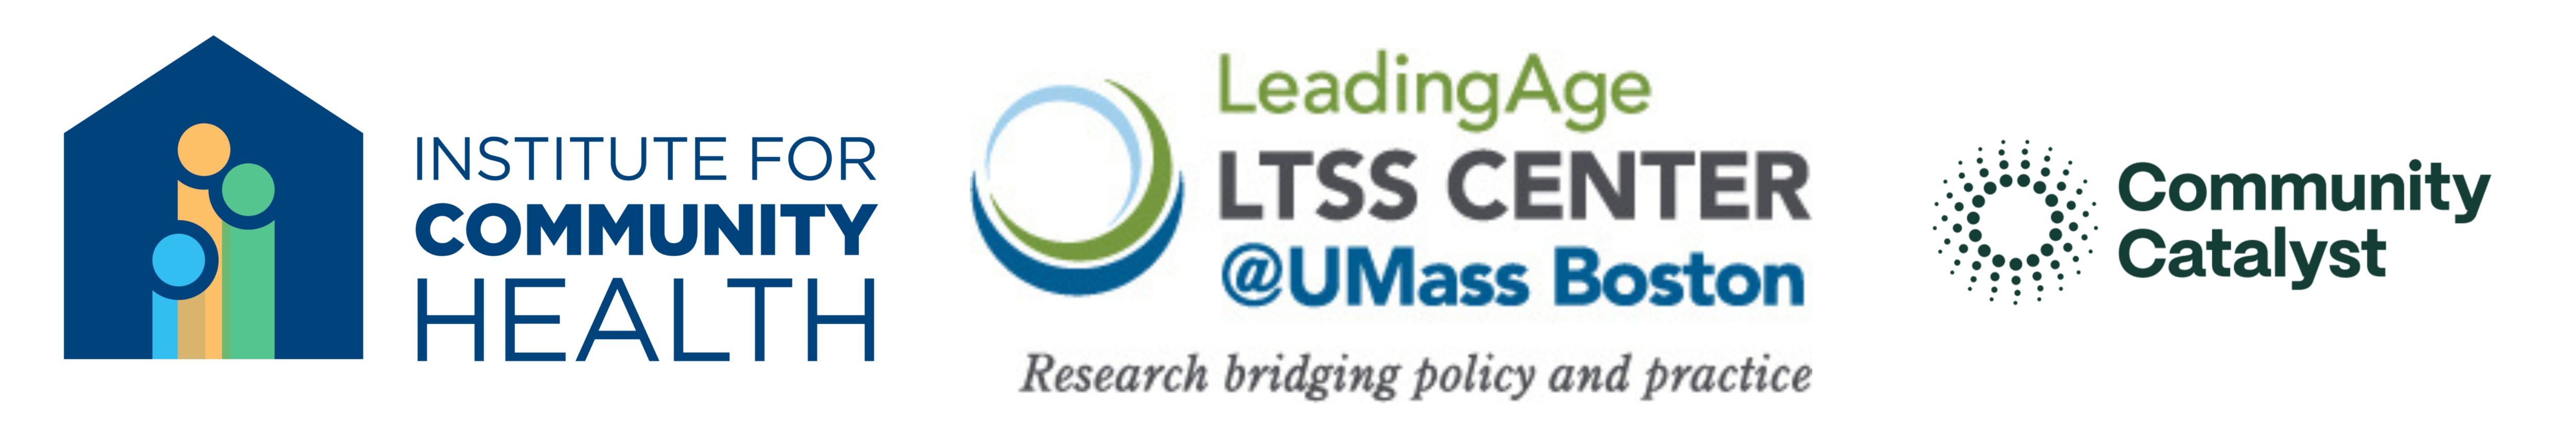 Group of Logos for Institute for Community Health, LeadingAge LTSS Center at UMass Boston, and Community Catalyst